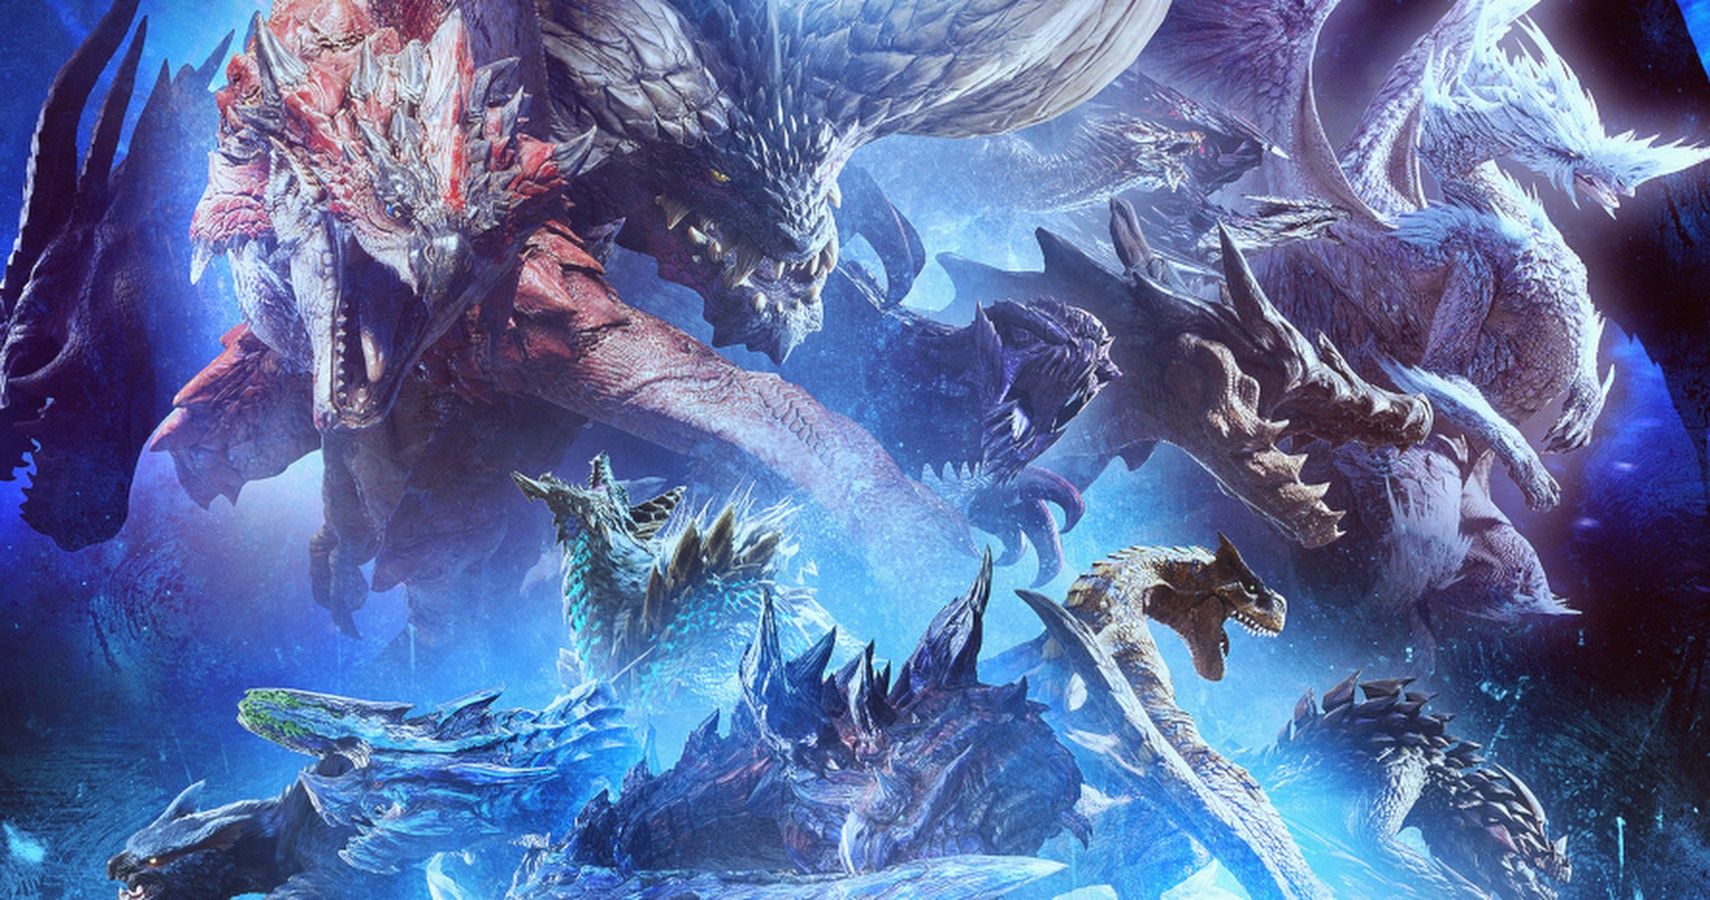 Monster Hunter World: Iceborne Review - A Very Ice Time - GameSpot